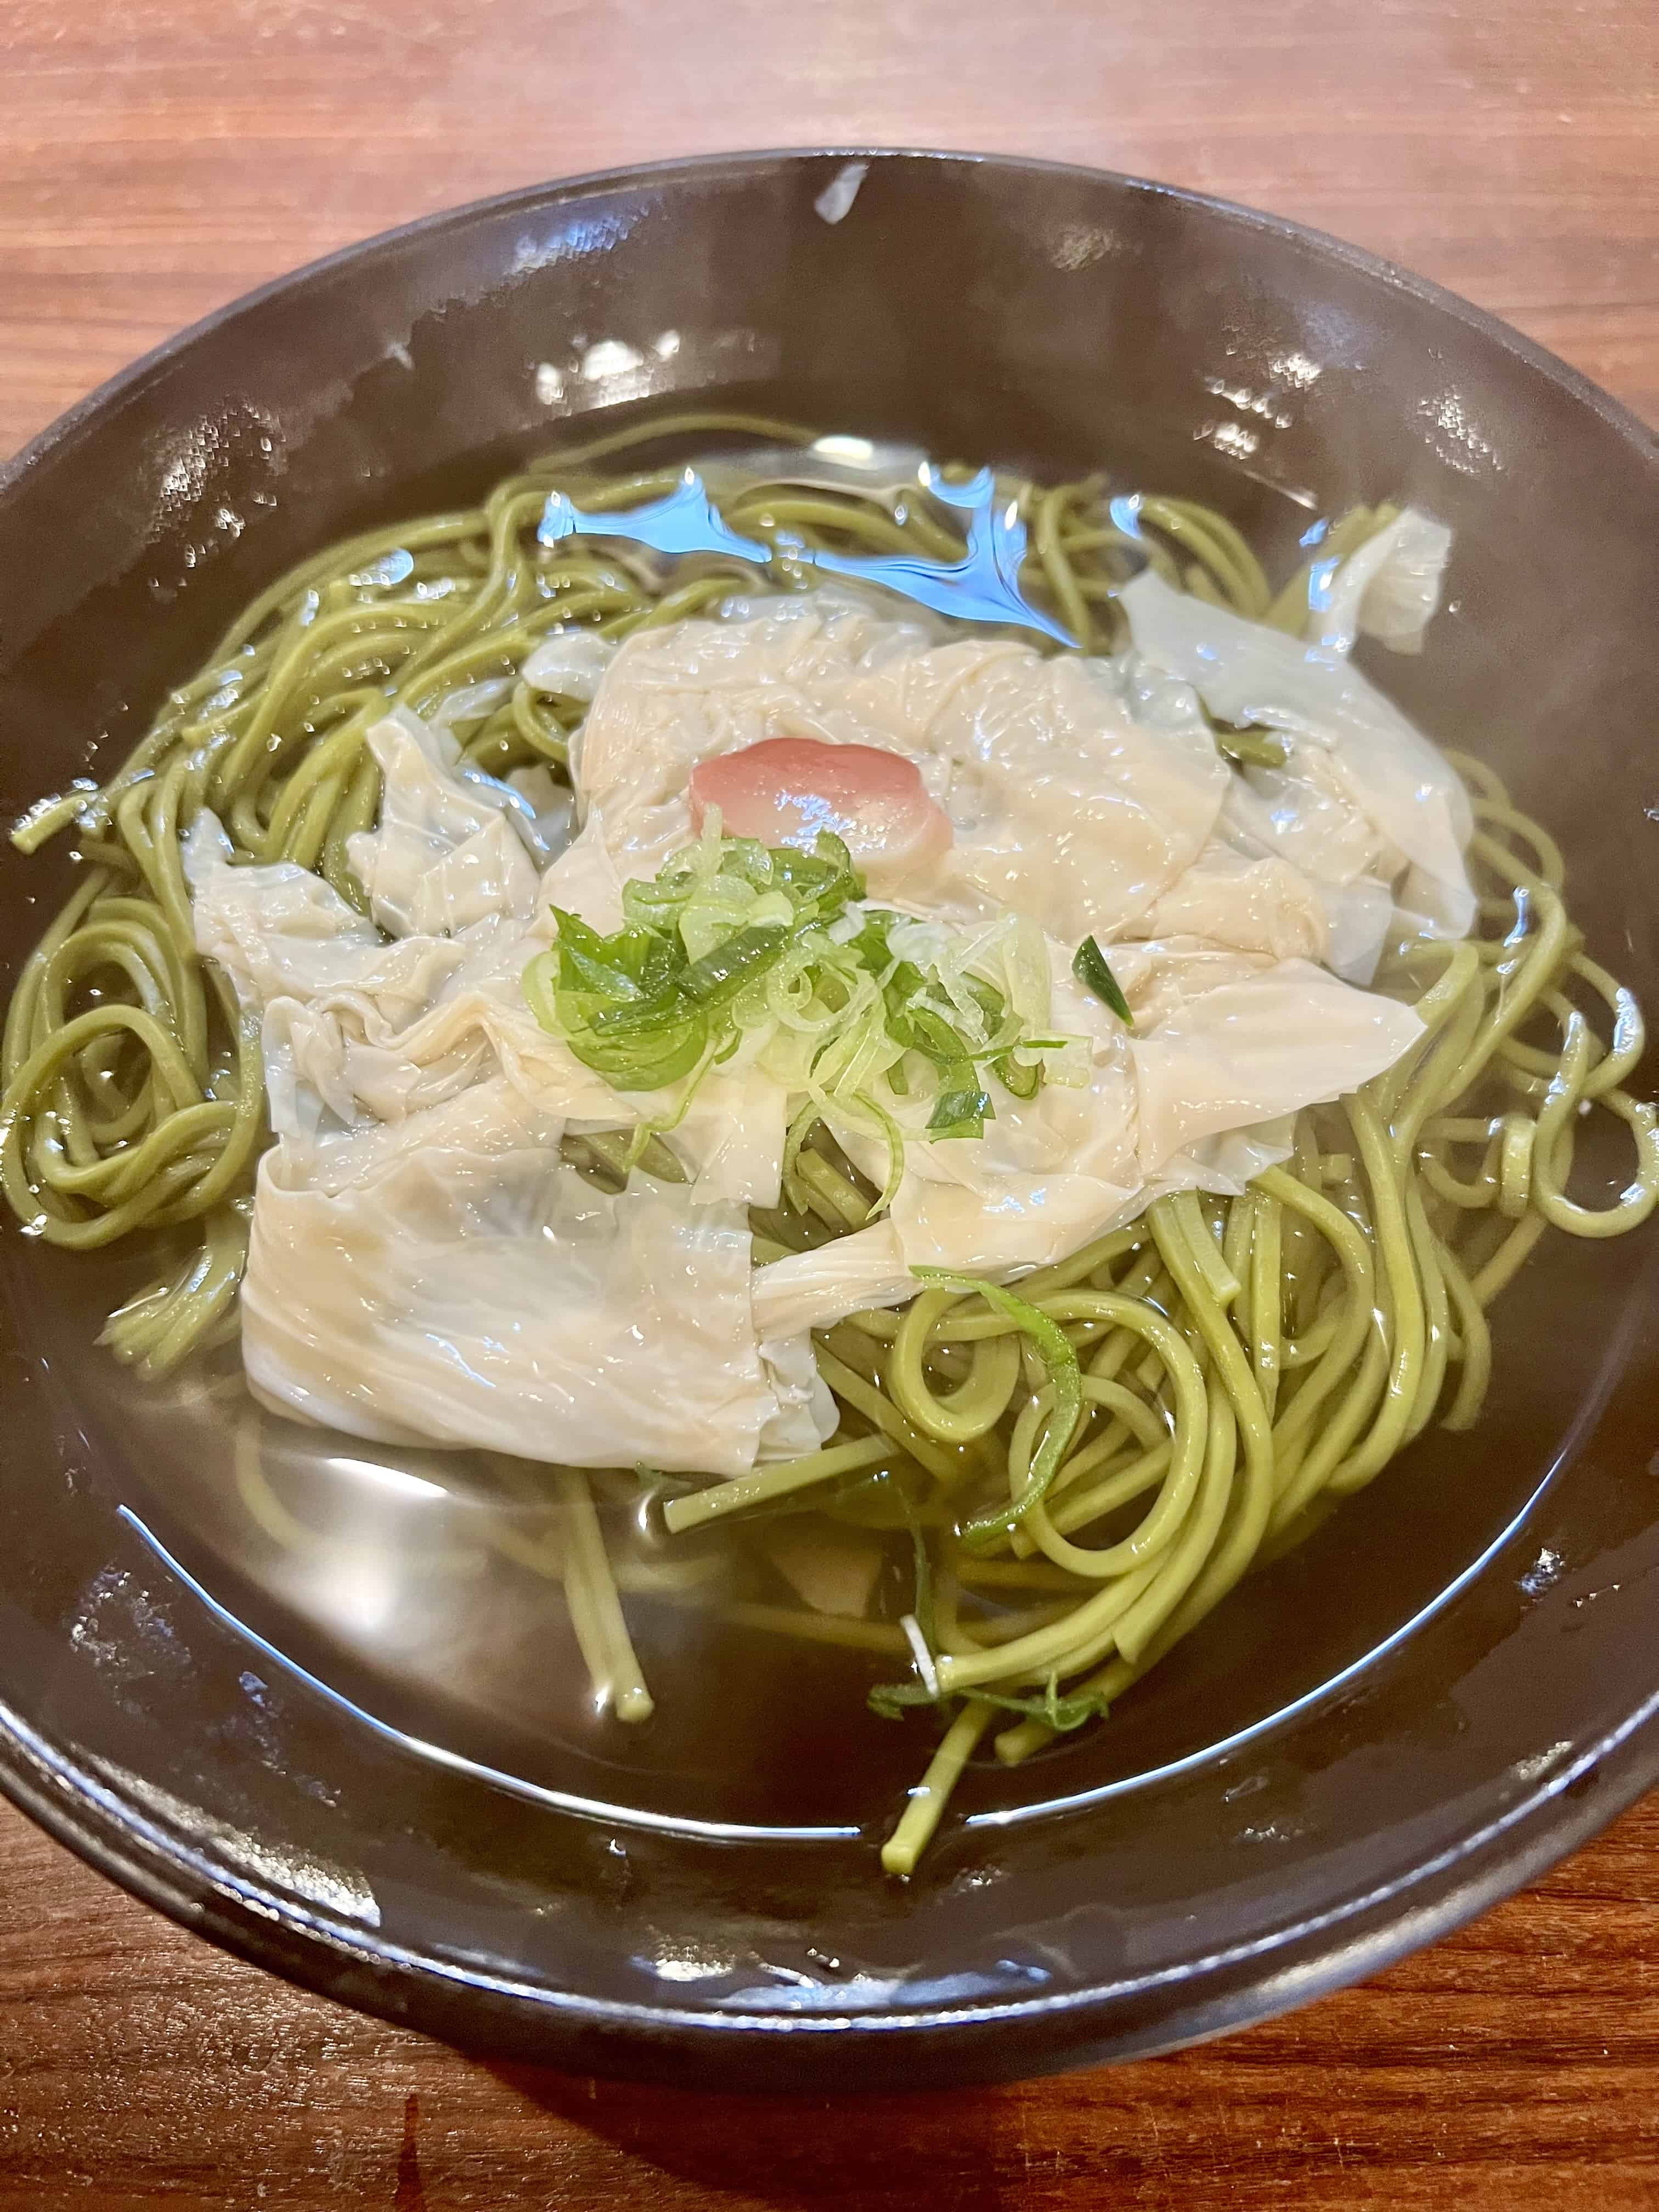 Green matcha soba noodles topped with white, filmy yuba.